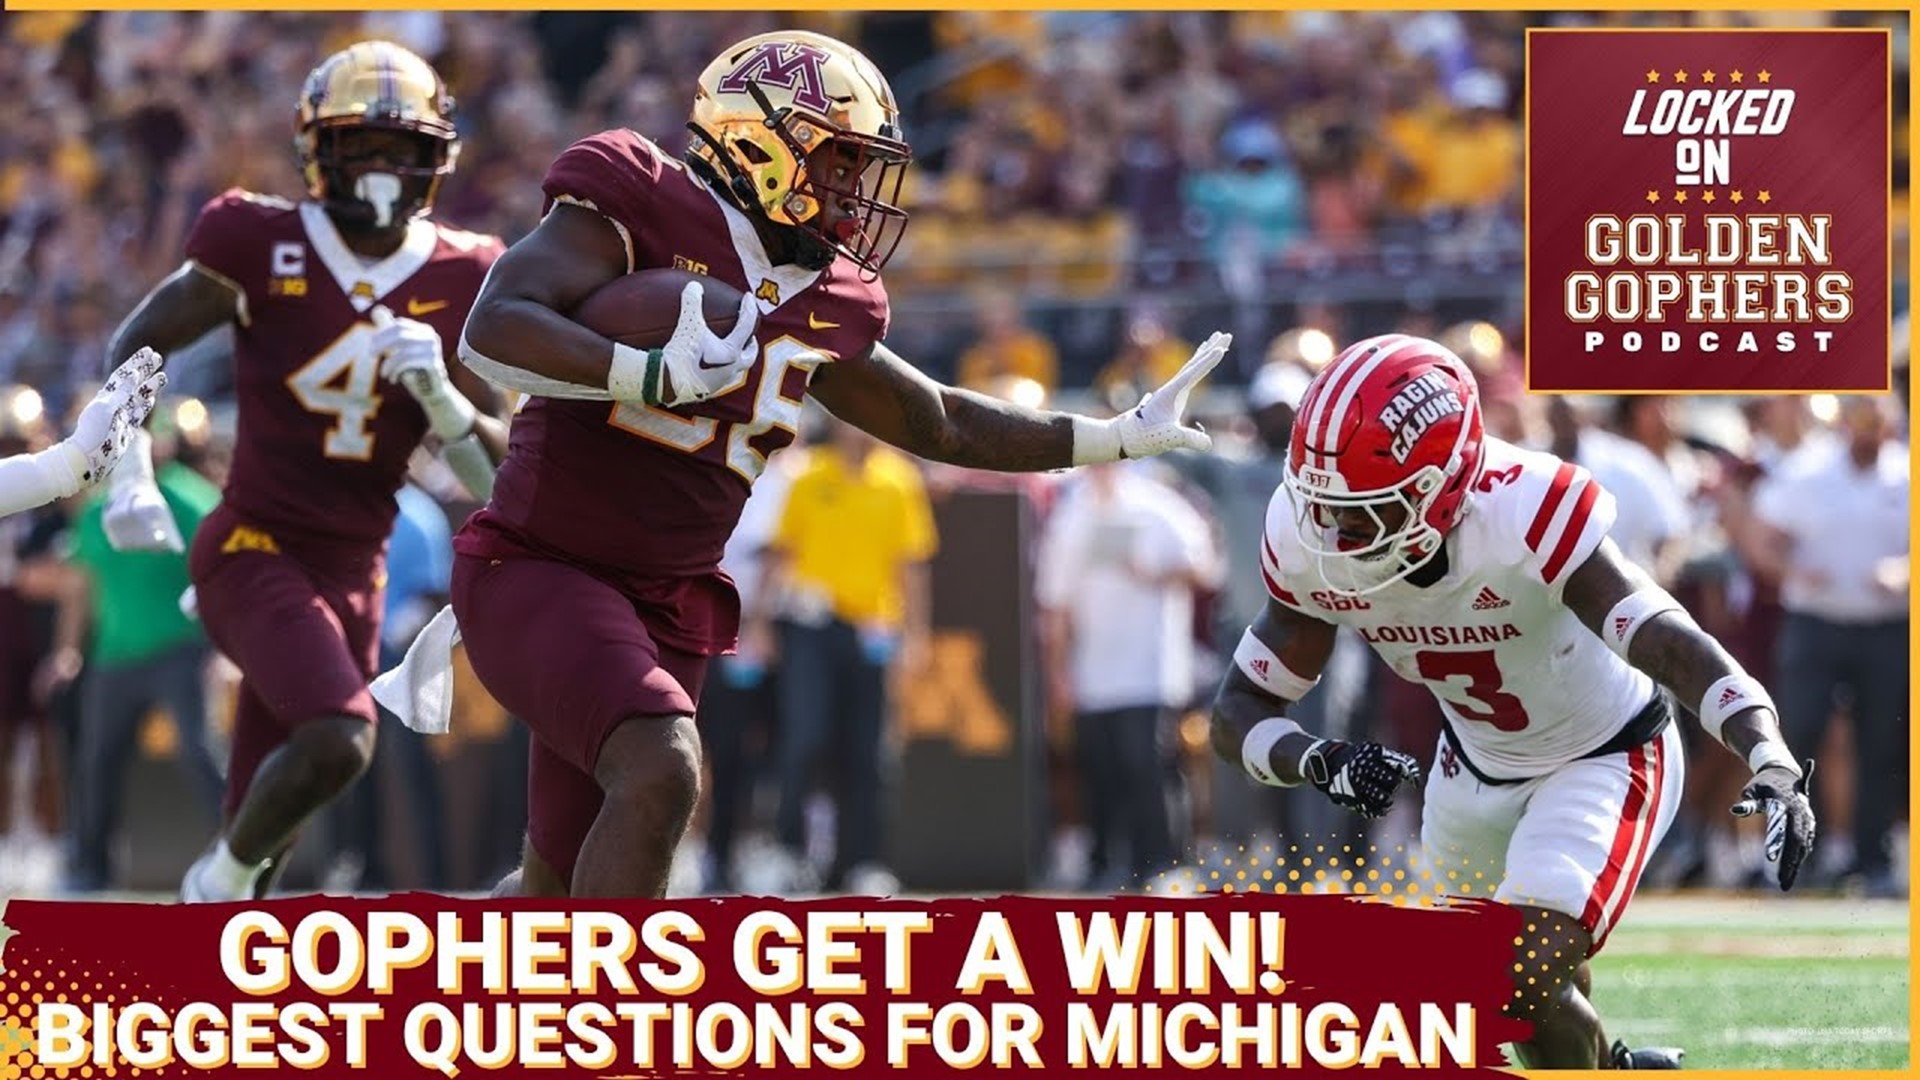 On today's episode of the Locked On Golden Gophers podcast we covered the takeaways both positive and negative for the Minnesota Gophers latest victory